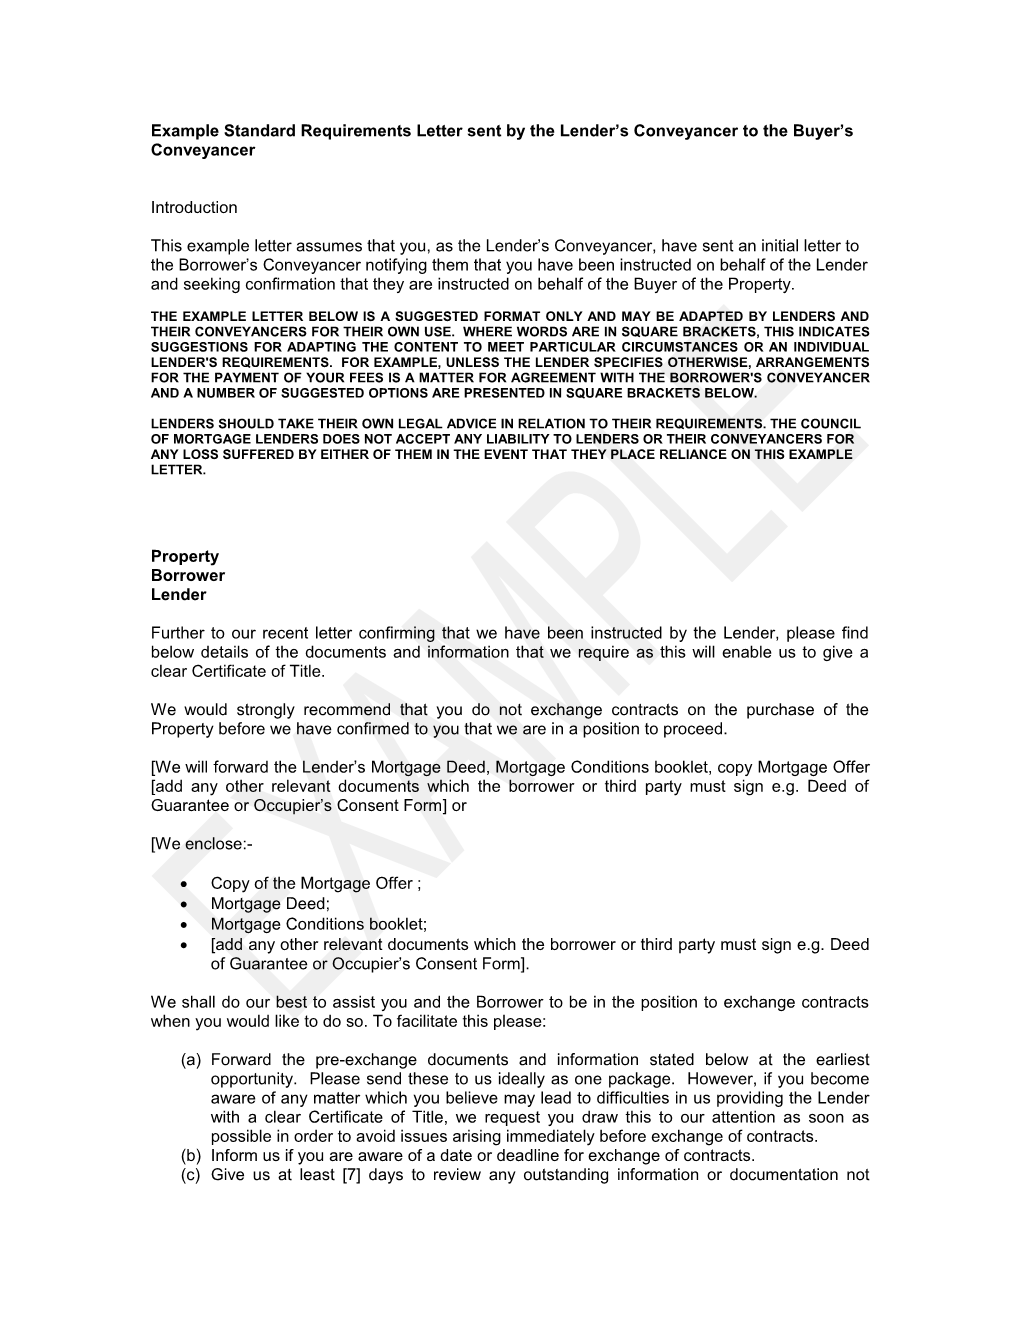 Examplestandard Requirements Letter Sent by the Lender S Conveyancer to the Buyer S Conveyancer